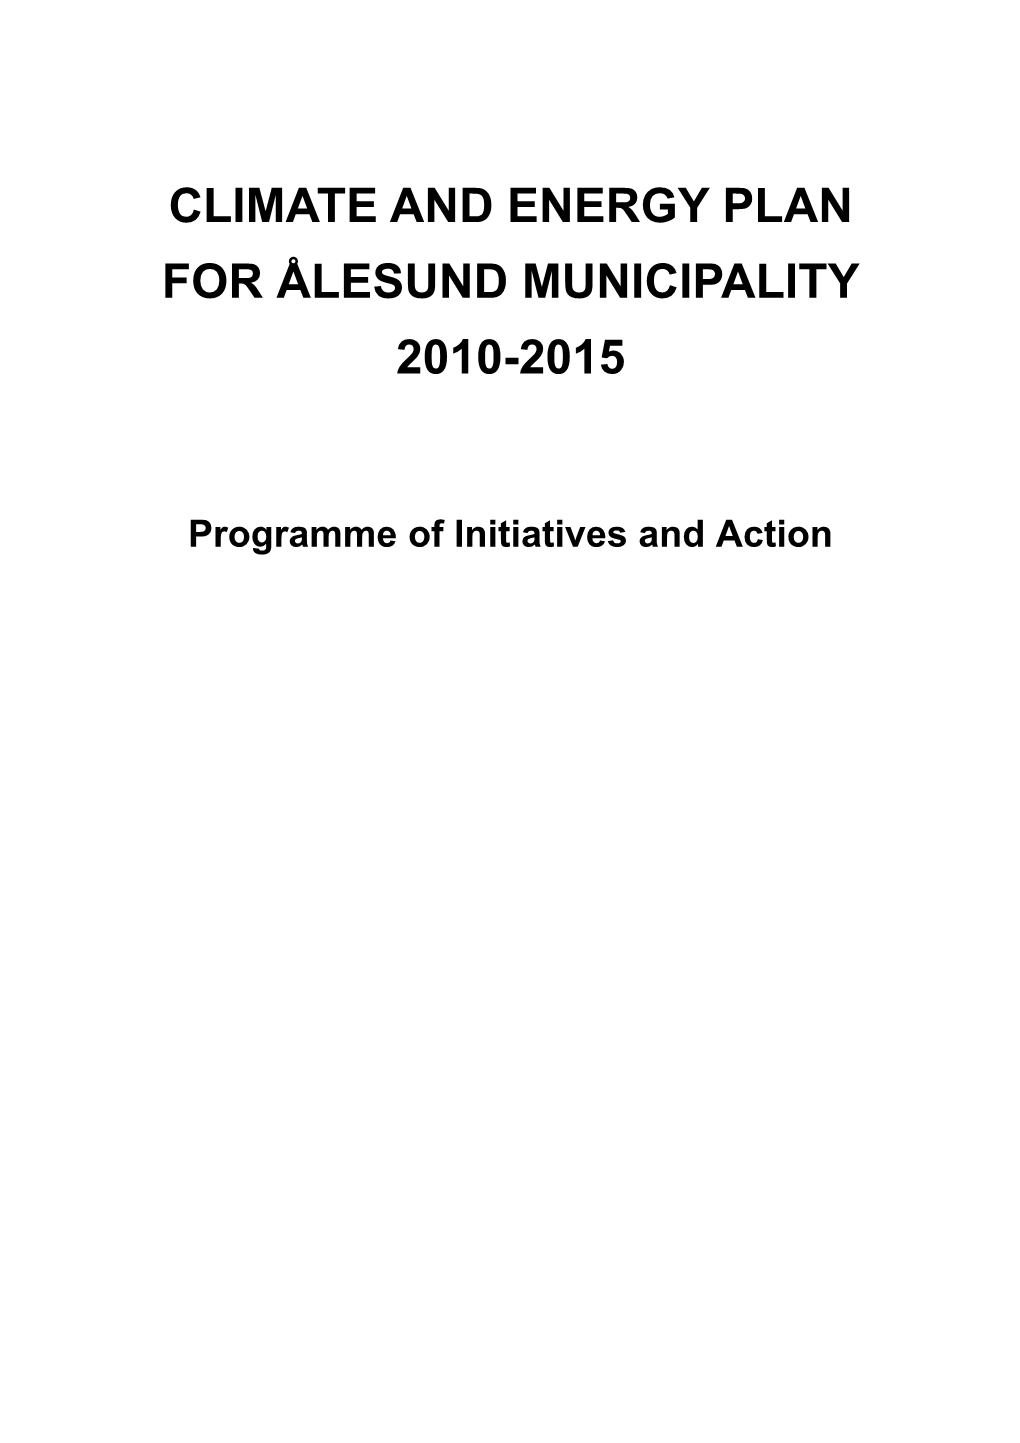 Climate and Energy Plan for Ålesund Municipality 2010-2015